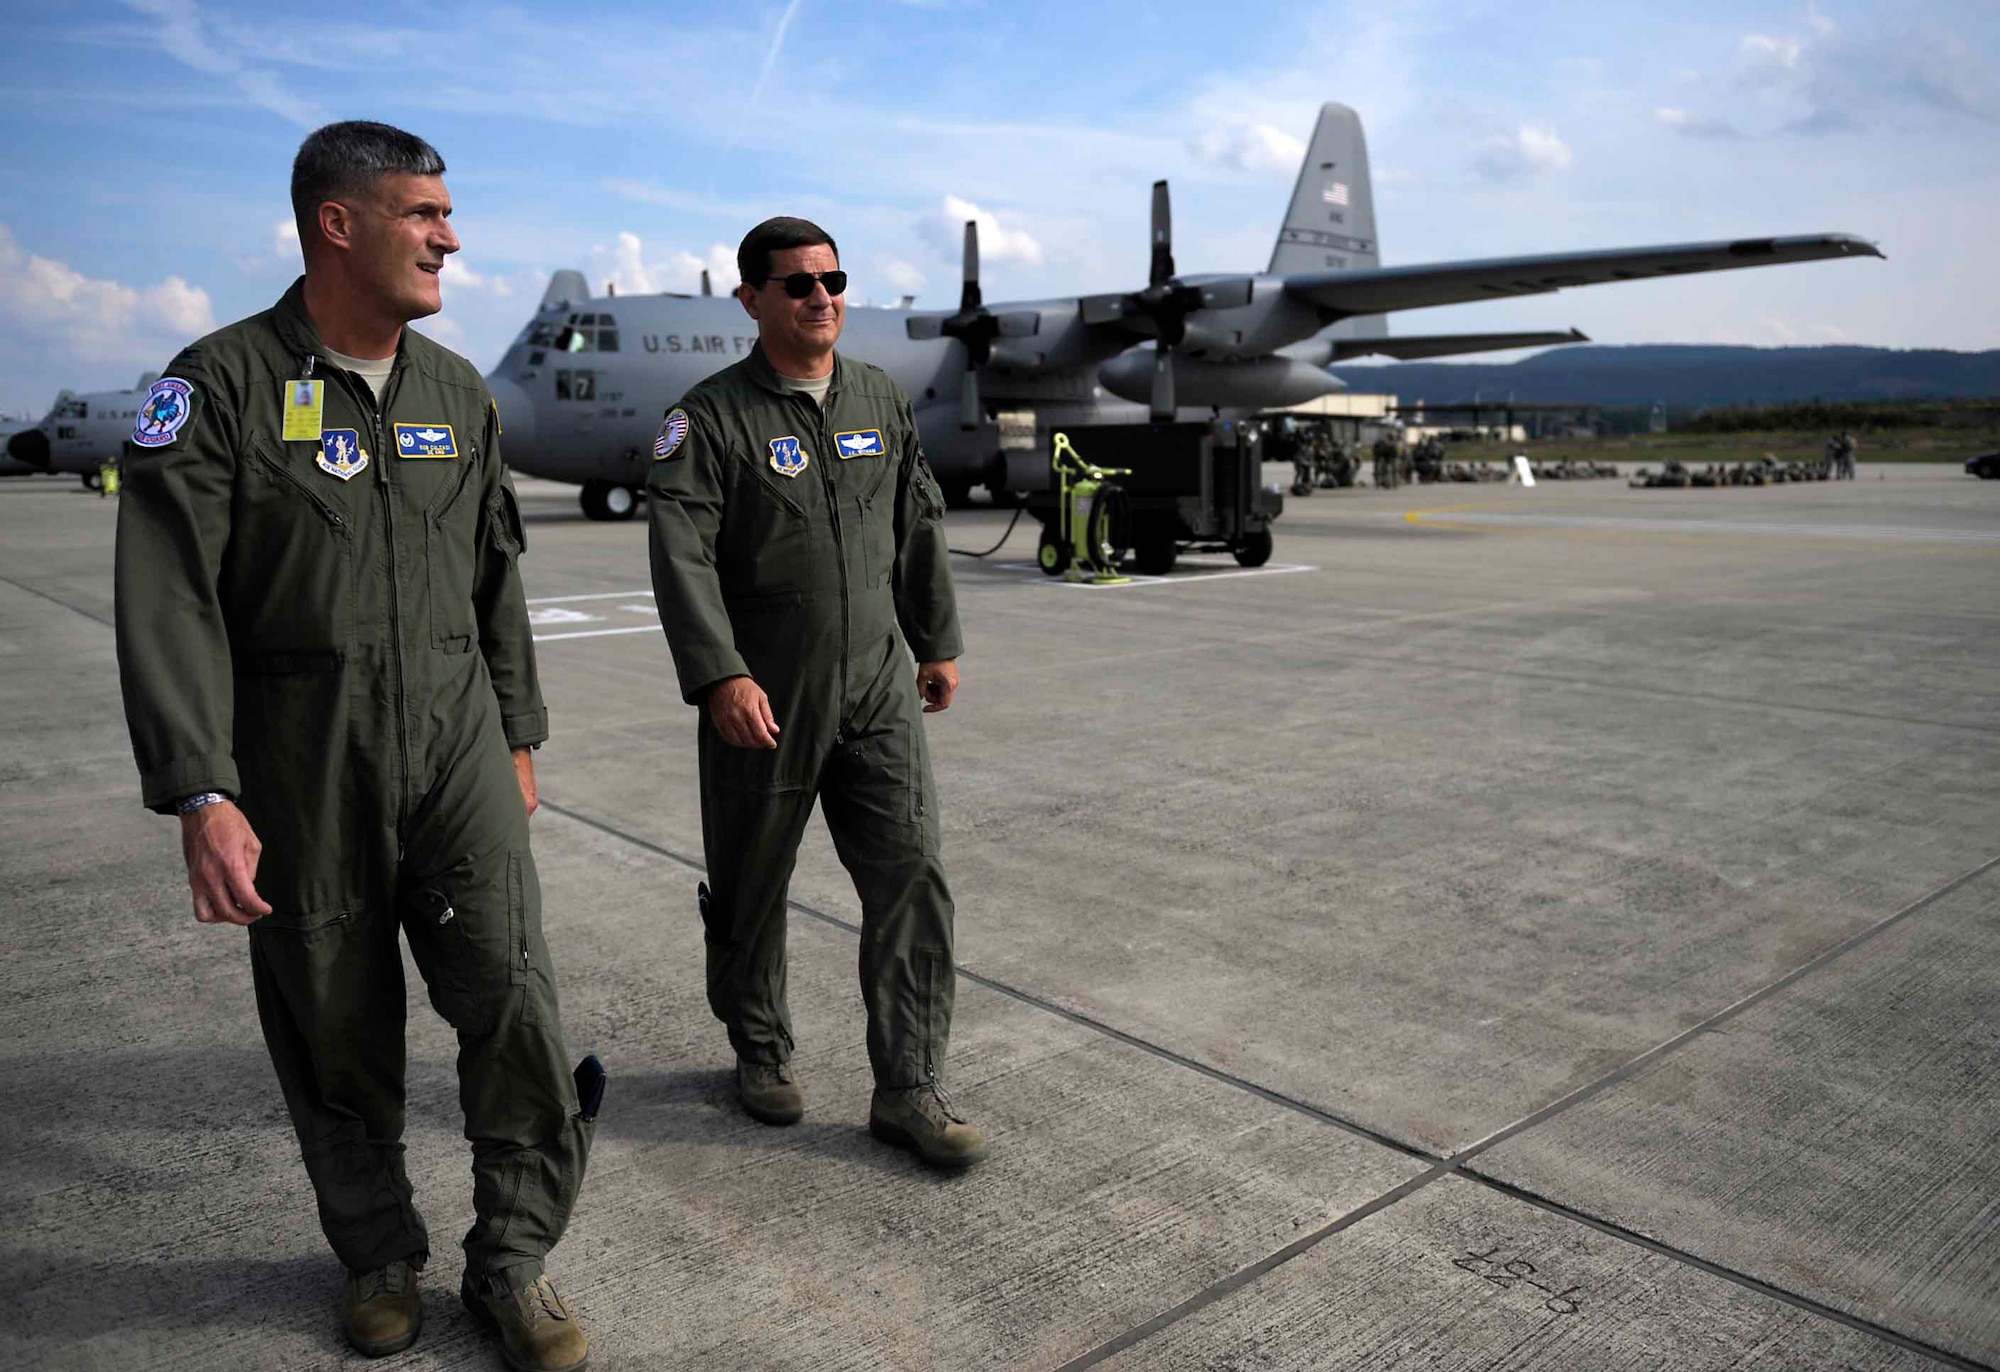 Brig. Gen. James C. Witham, U.S. Air National Guard deputy director, walks with Col. Robert Culcasi, 166th Operations Group commander, on the flightline during Steadfast Javelin II on Ramstein Air Base, Germany, Sept. 5, 2014. Active-duty and ANG aircraft are supporting Steadfast Javelin II by providing personnel air drop and air landings in support of forcible entry, force projection and reinforcing the joint commitment to Operation Atlantic Resolve, which demonstrates commitment to NATO Allies and security in Eastern Europe. (U.S. Air Force photo by Staff Sgt. Sara Keller)